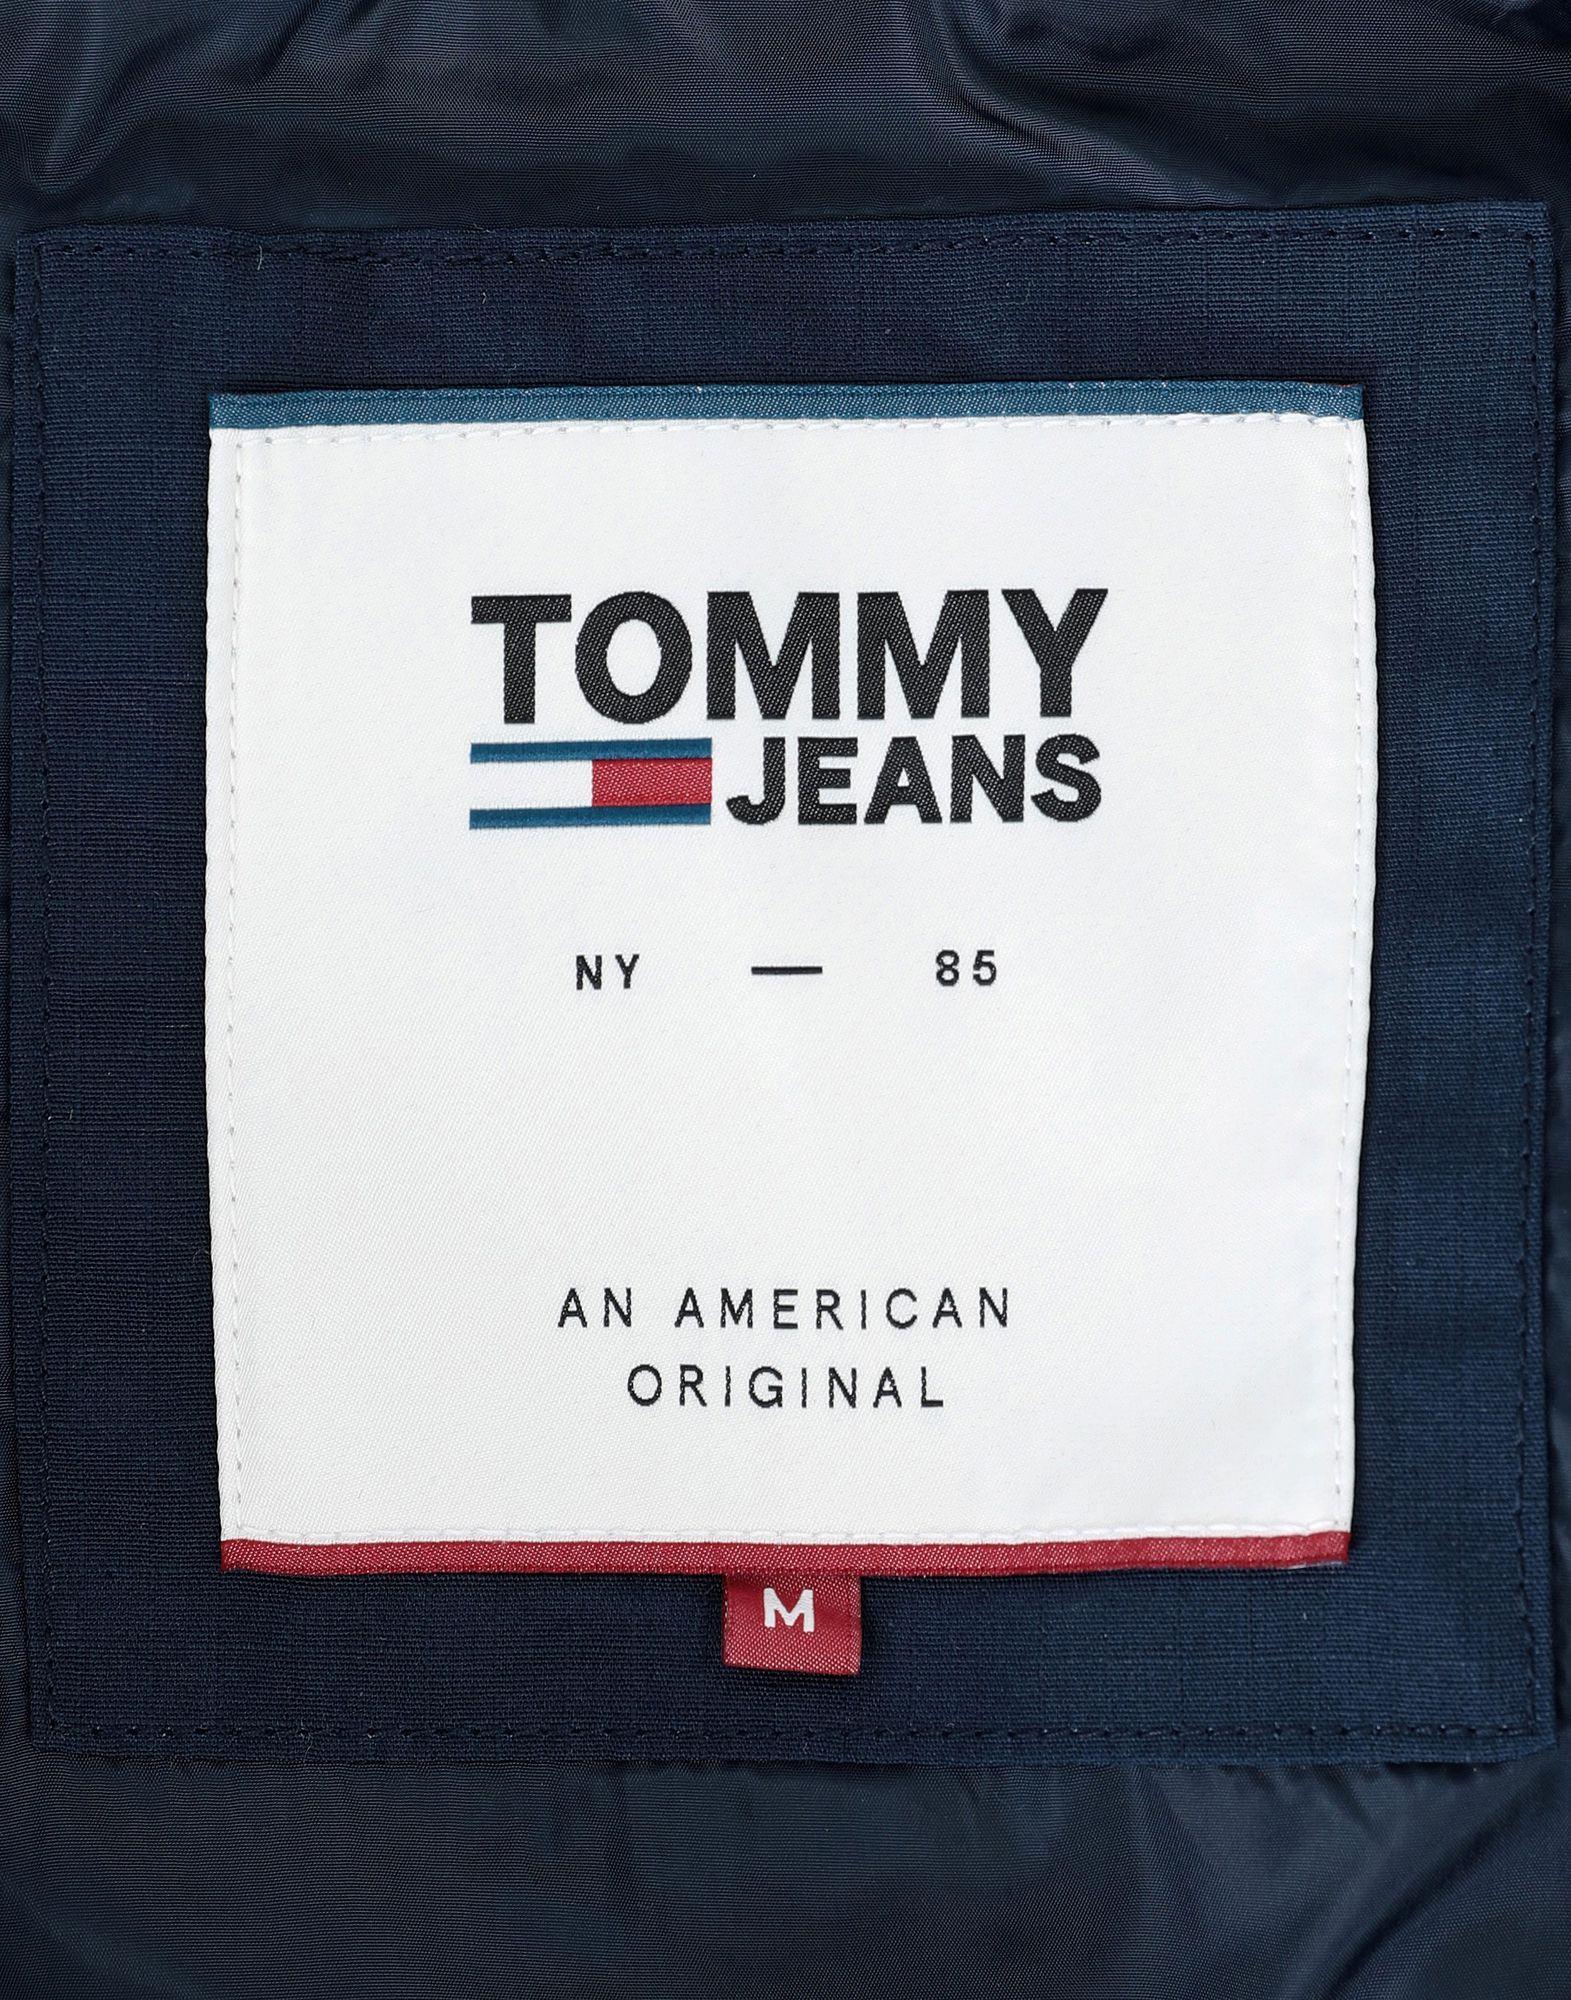 Buy > tommy jeans an american original jacket > in stock